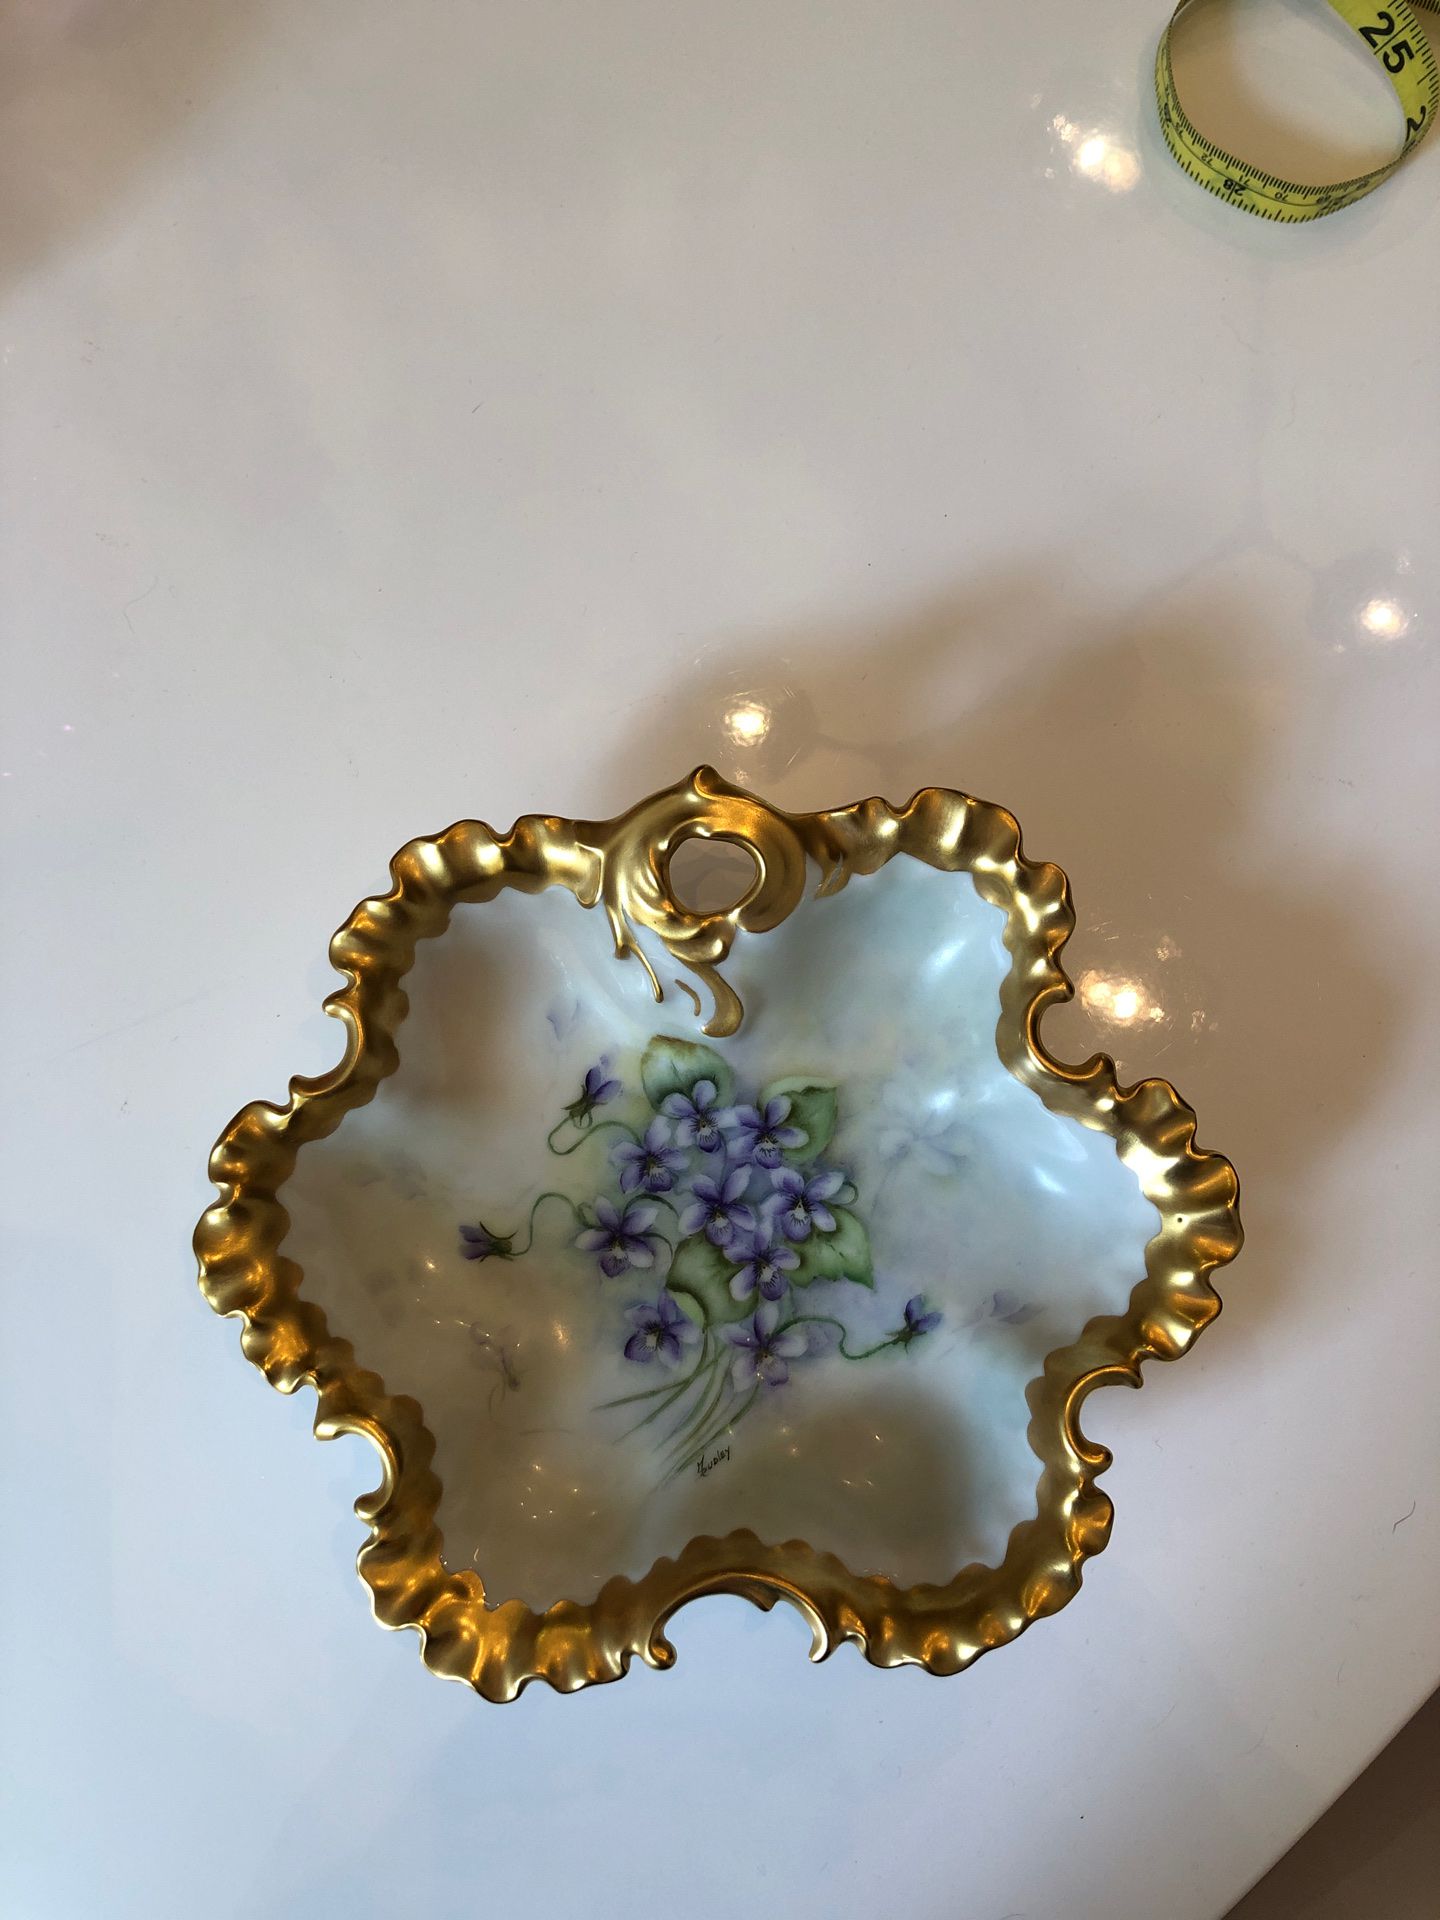 Exquisite Hand-Painted Trinket Tray